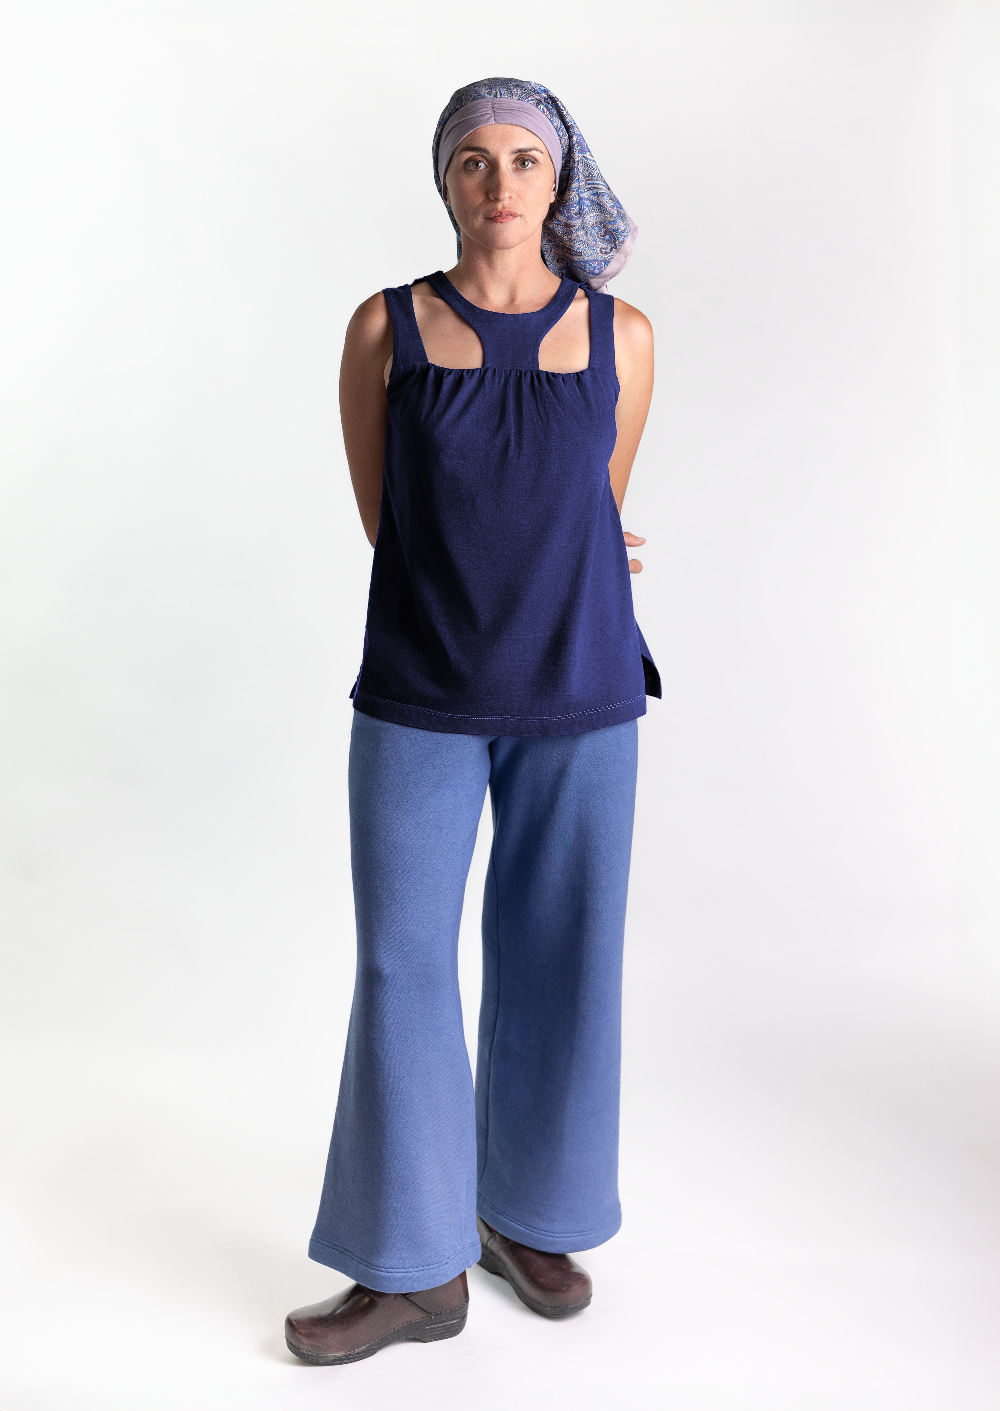 fashionable woman in a medically accessible adaptive wear tank top and headscarf 